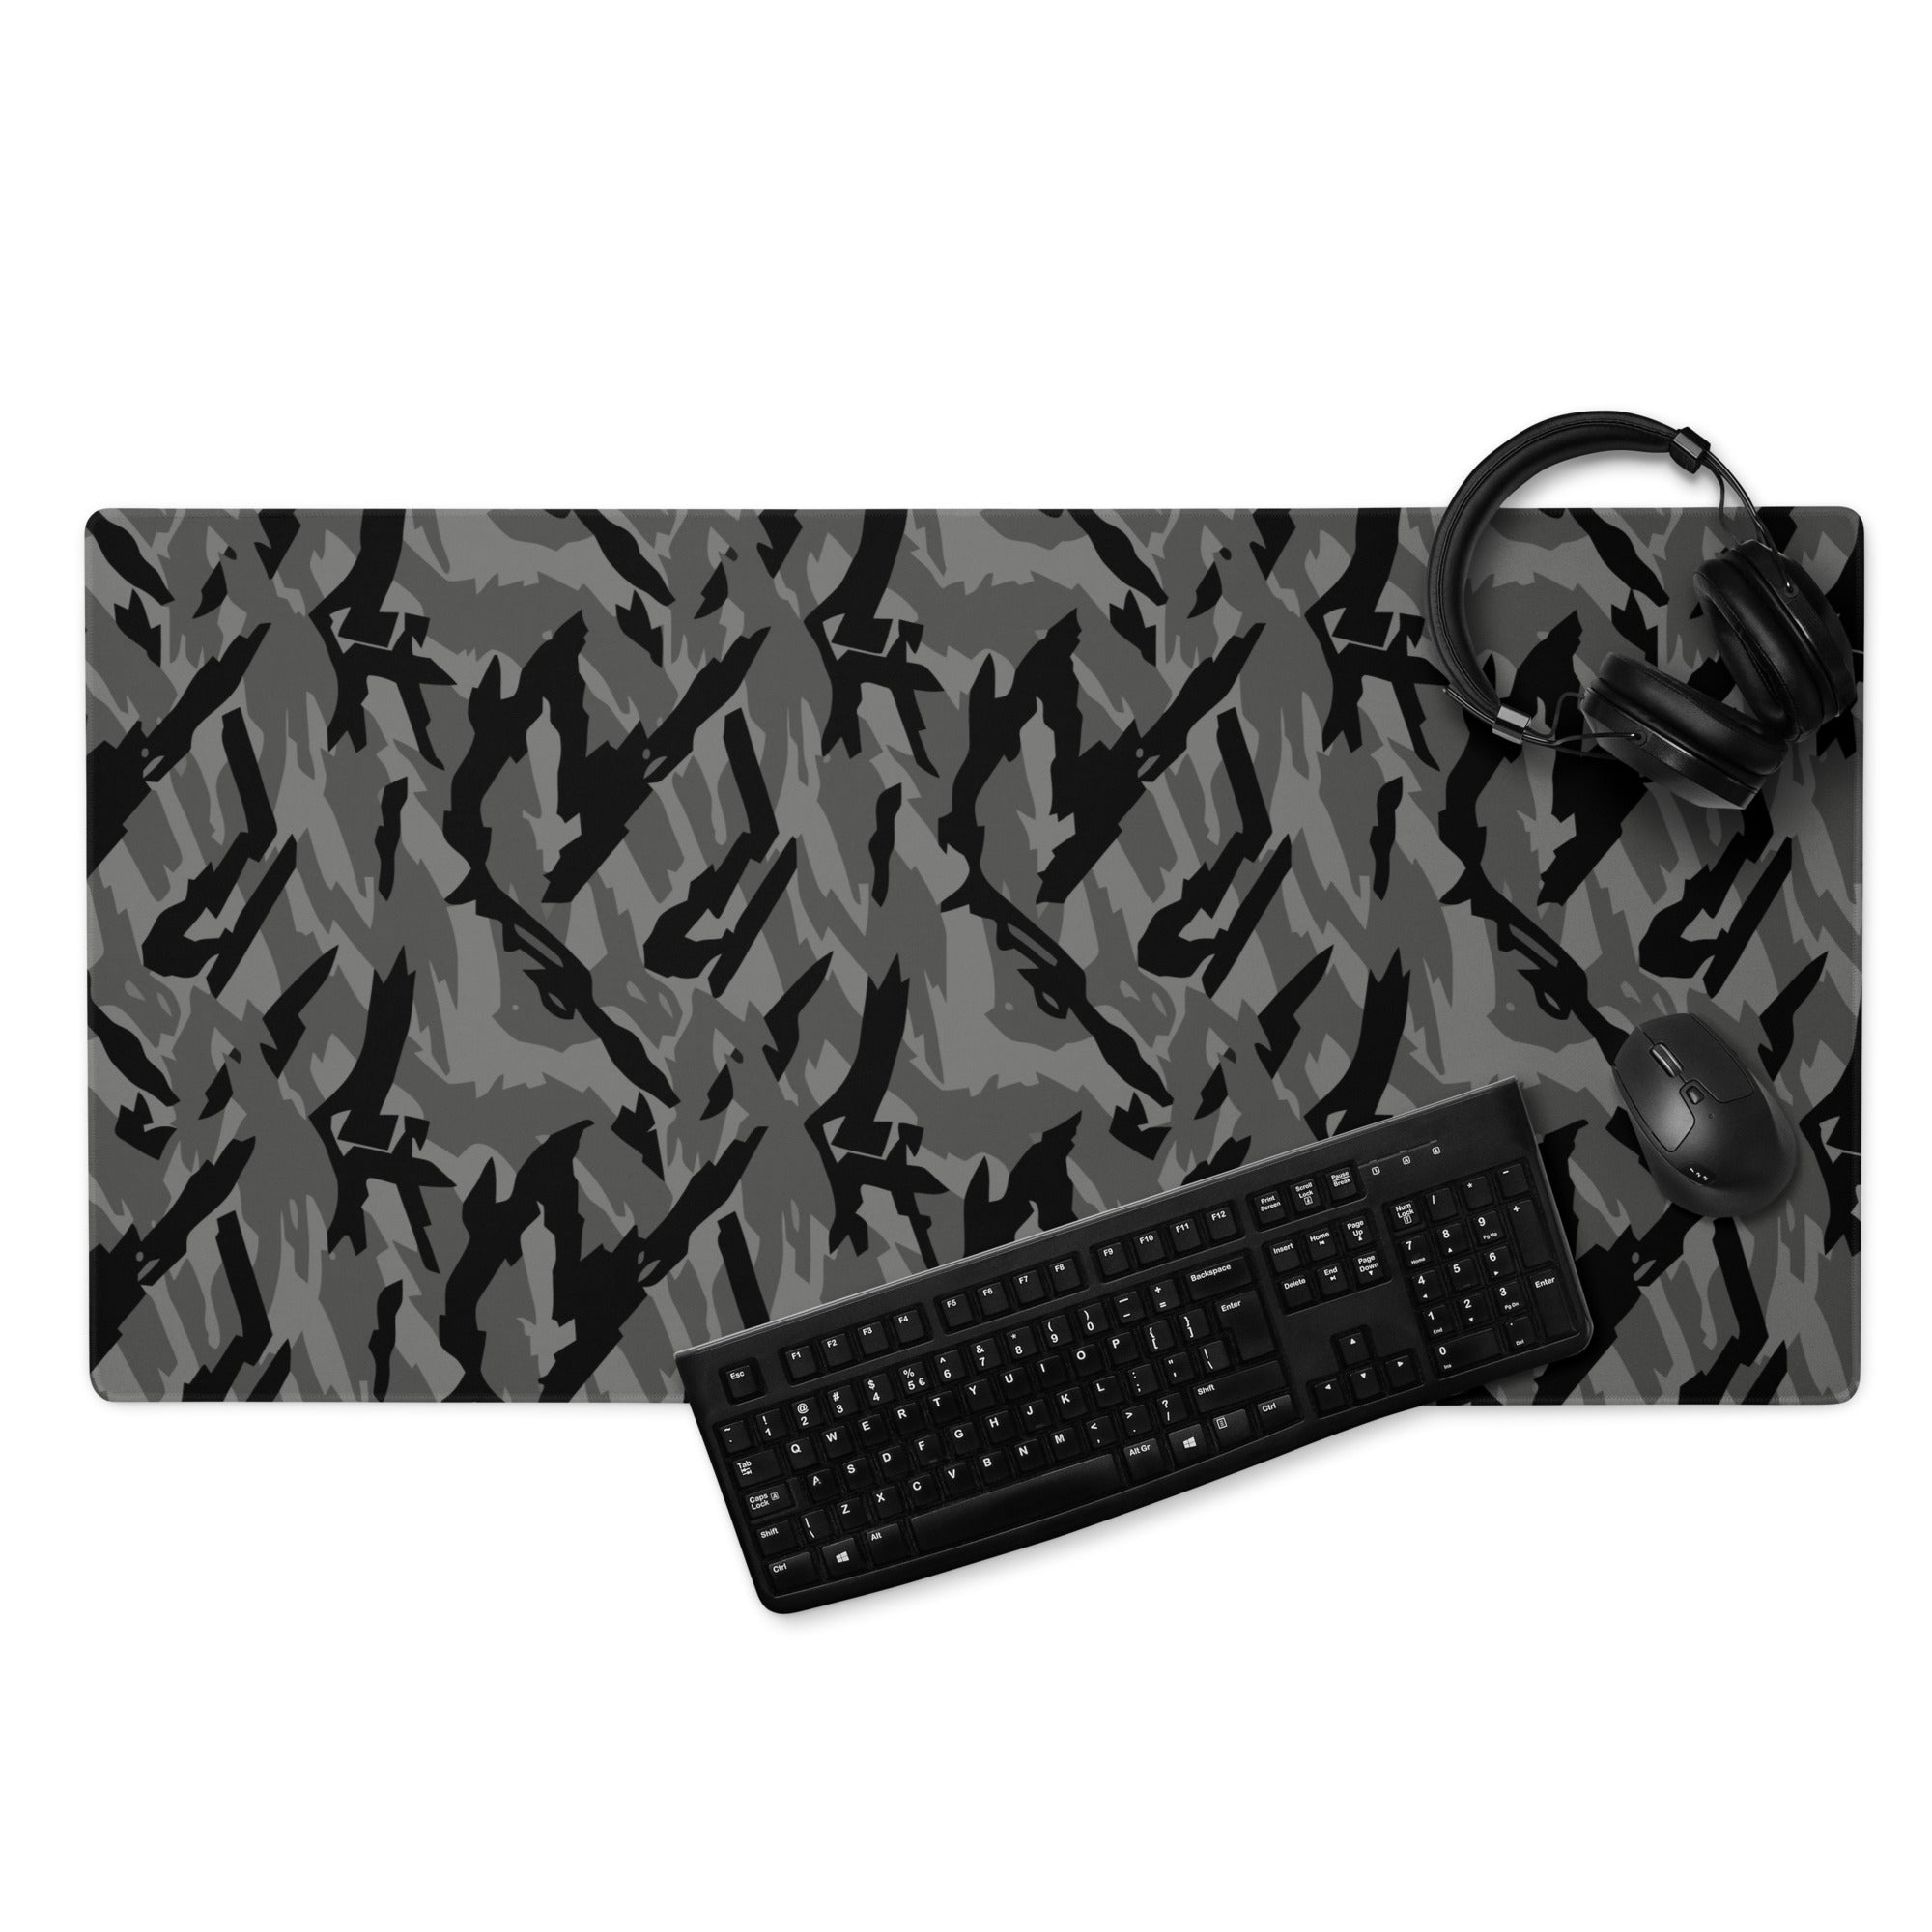 Russian Podlesok Reed Urban CAMO Gaming mouse pad - 36″×18″